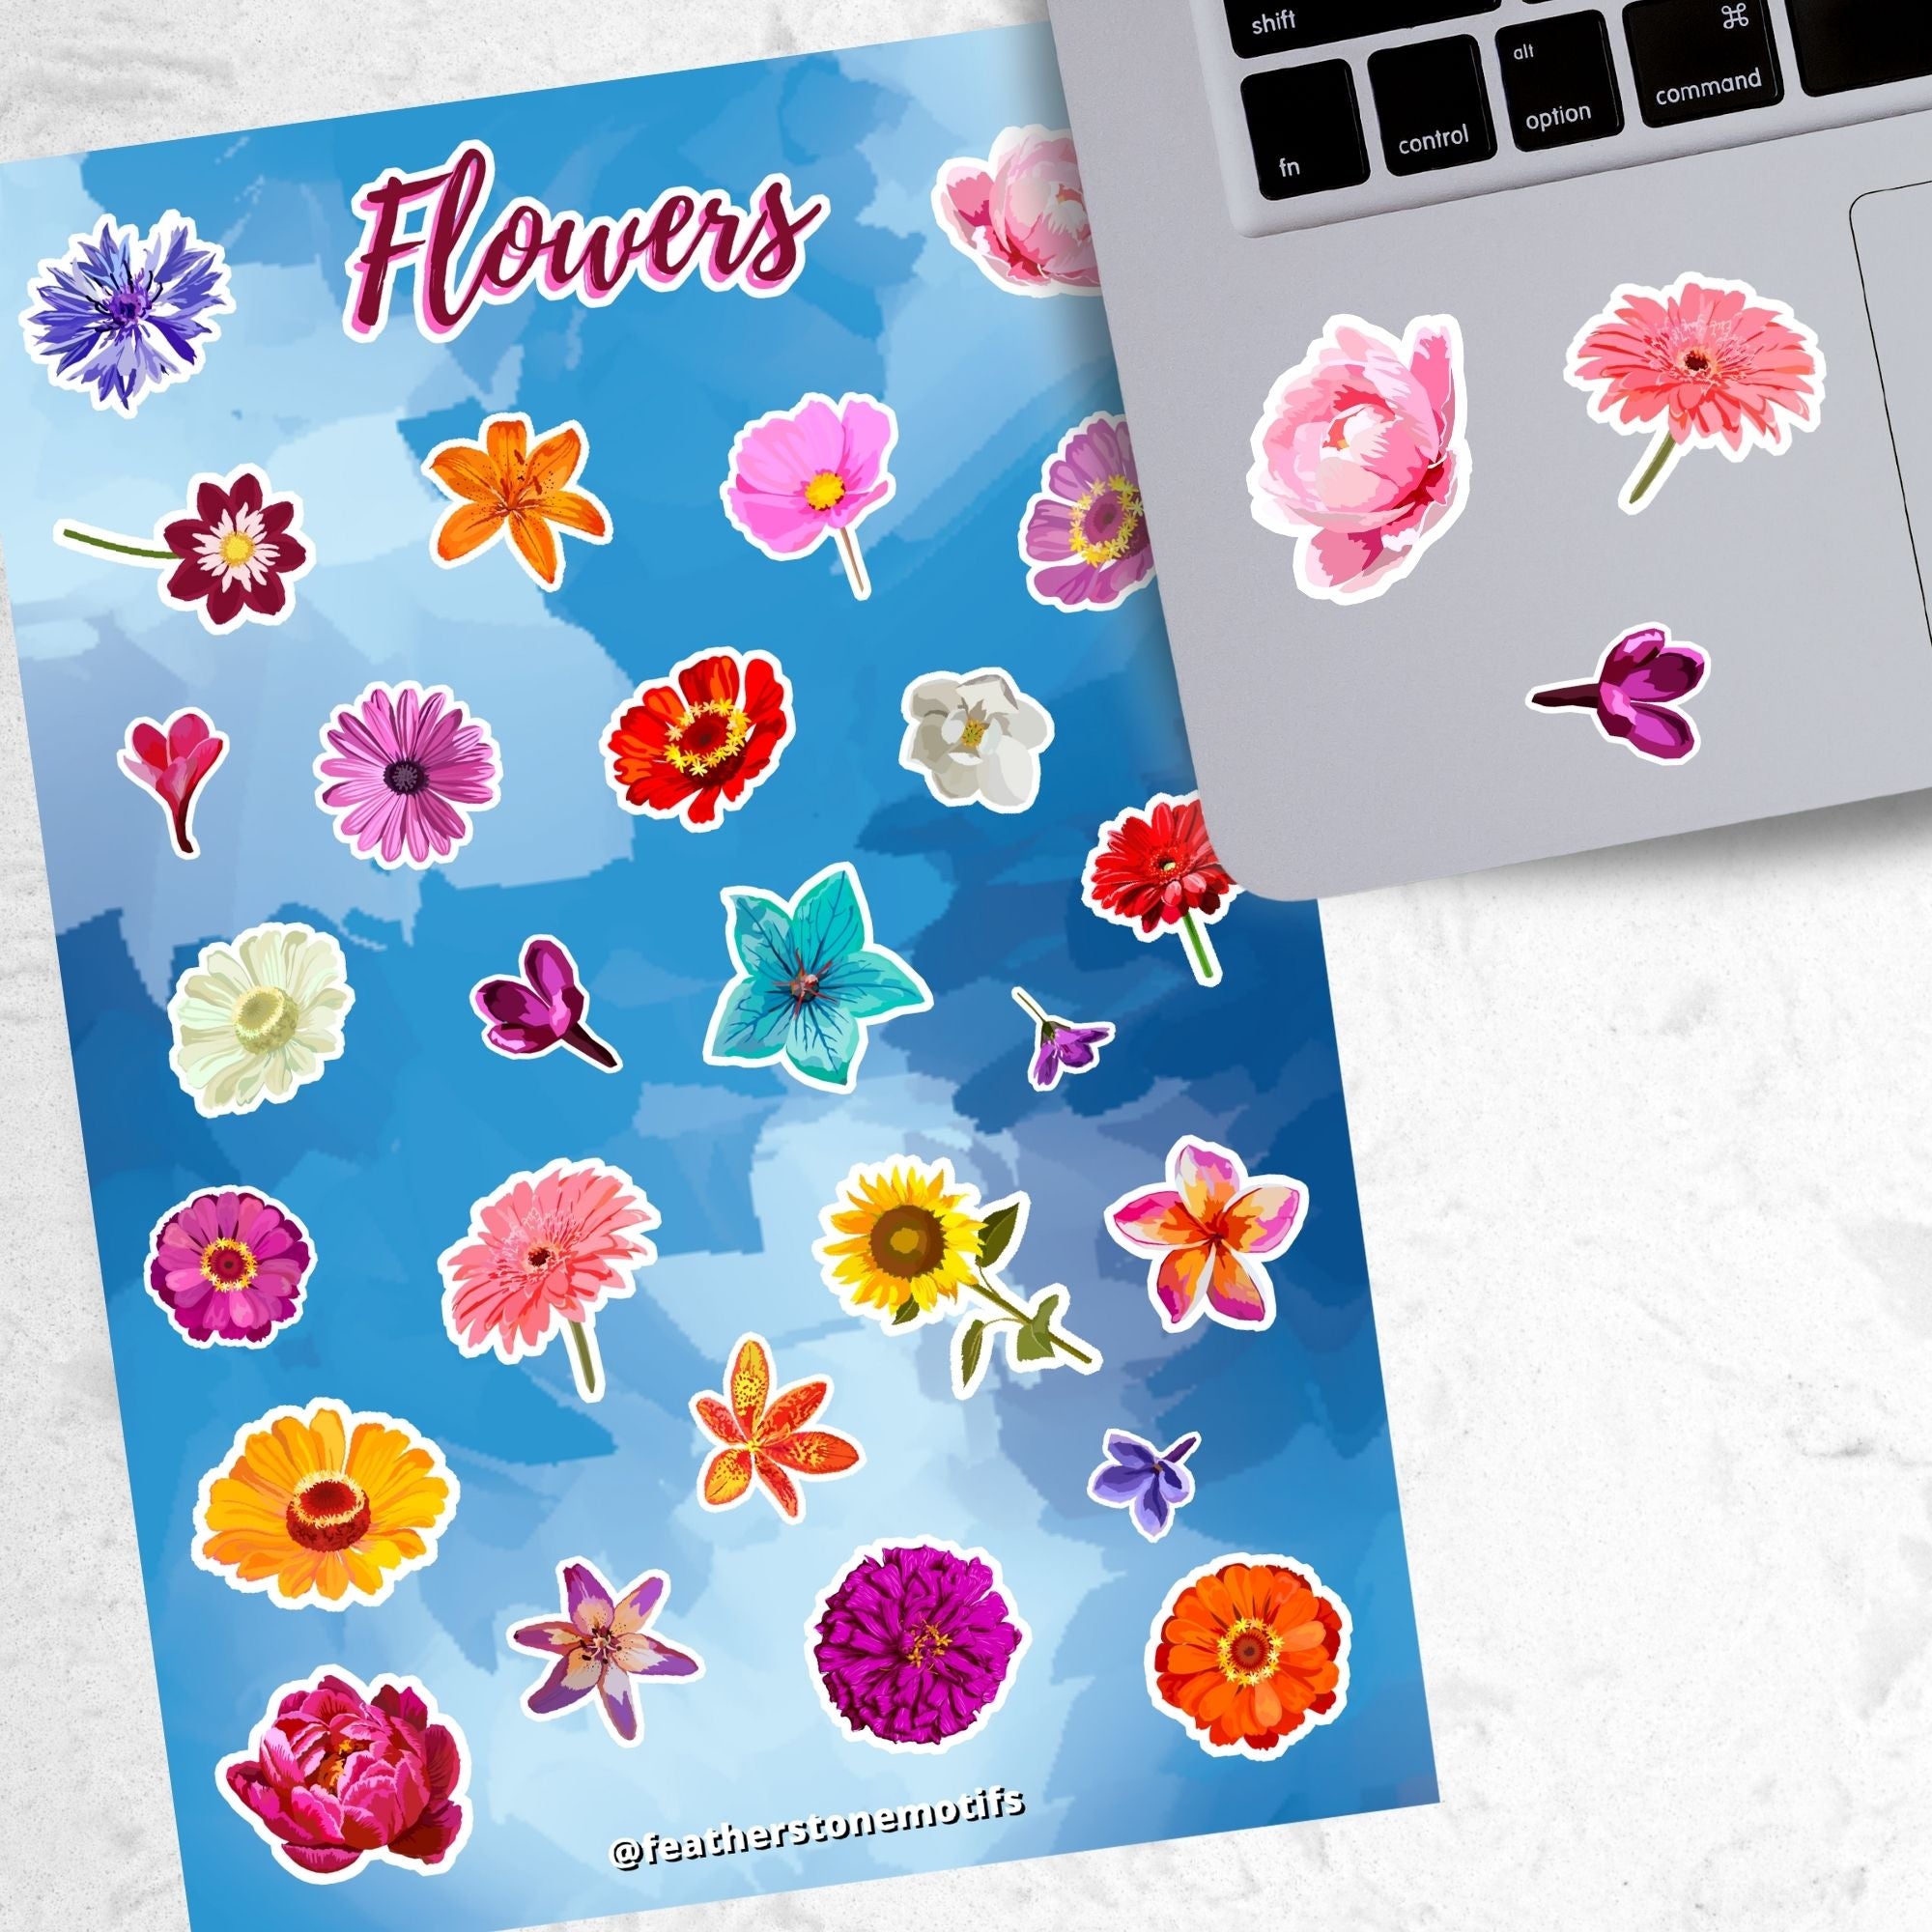 So many flowers! This sticker sheet is filled with images of all your favorite flowers. This image shows the sticker sheet next to an open laptop with three different flower stickers applied below the keyboard.